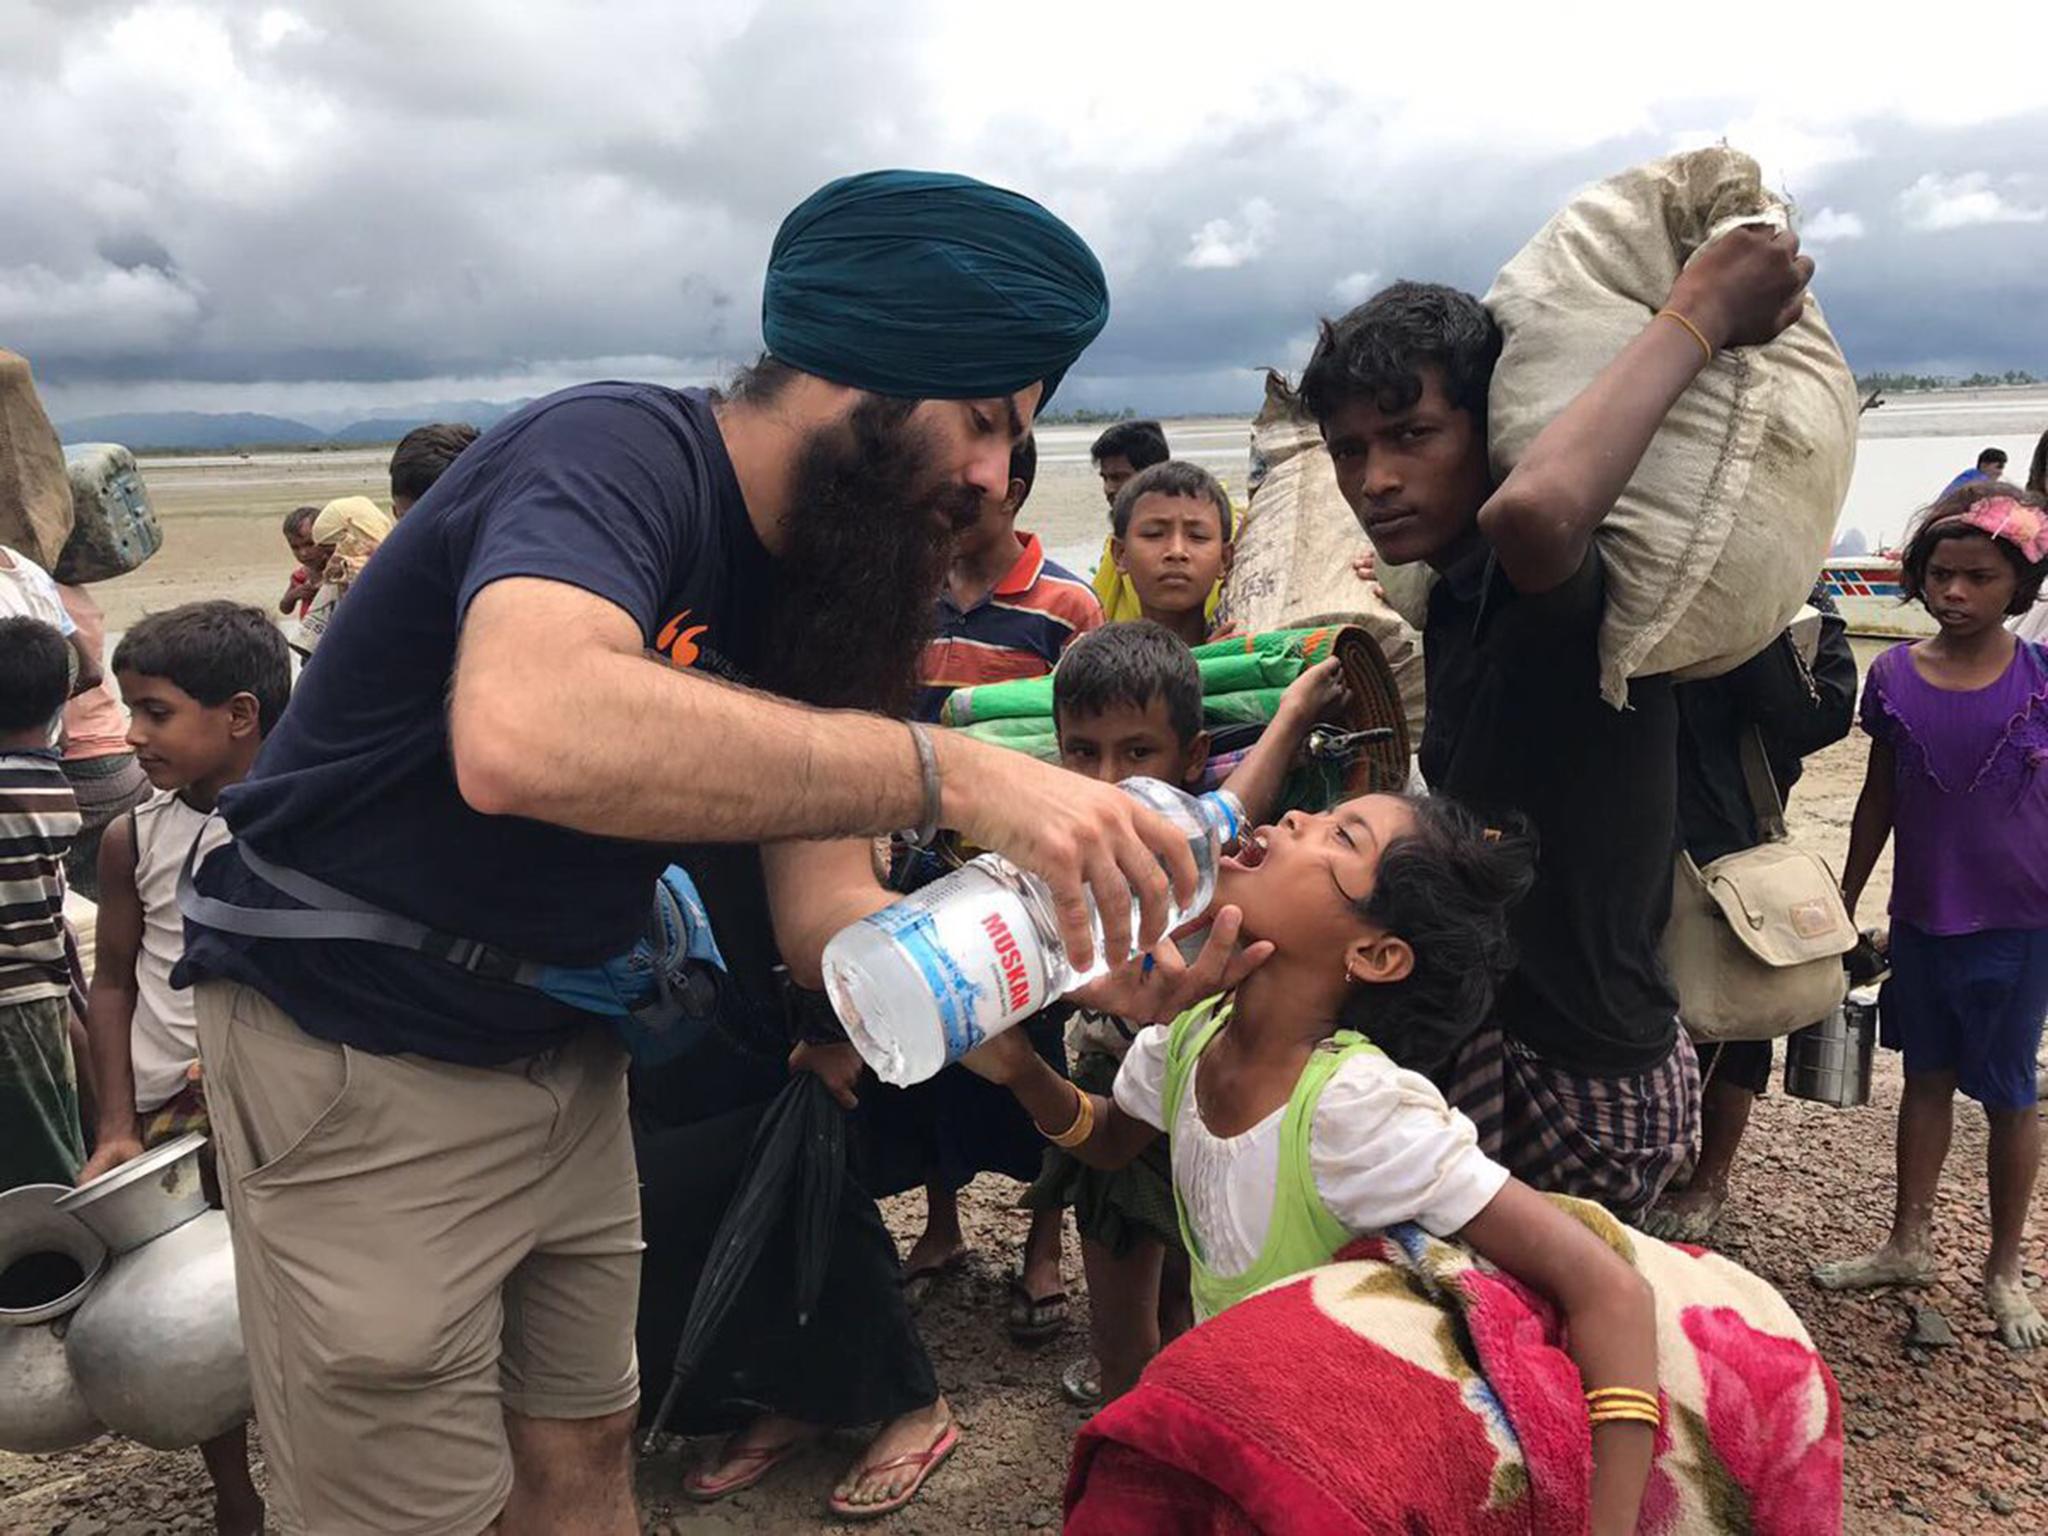 A volunteer gives water to a child said to be fleeing violence in Burma